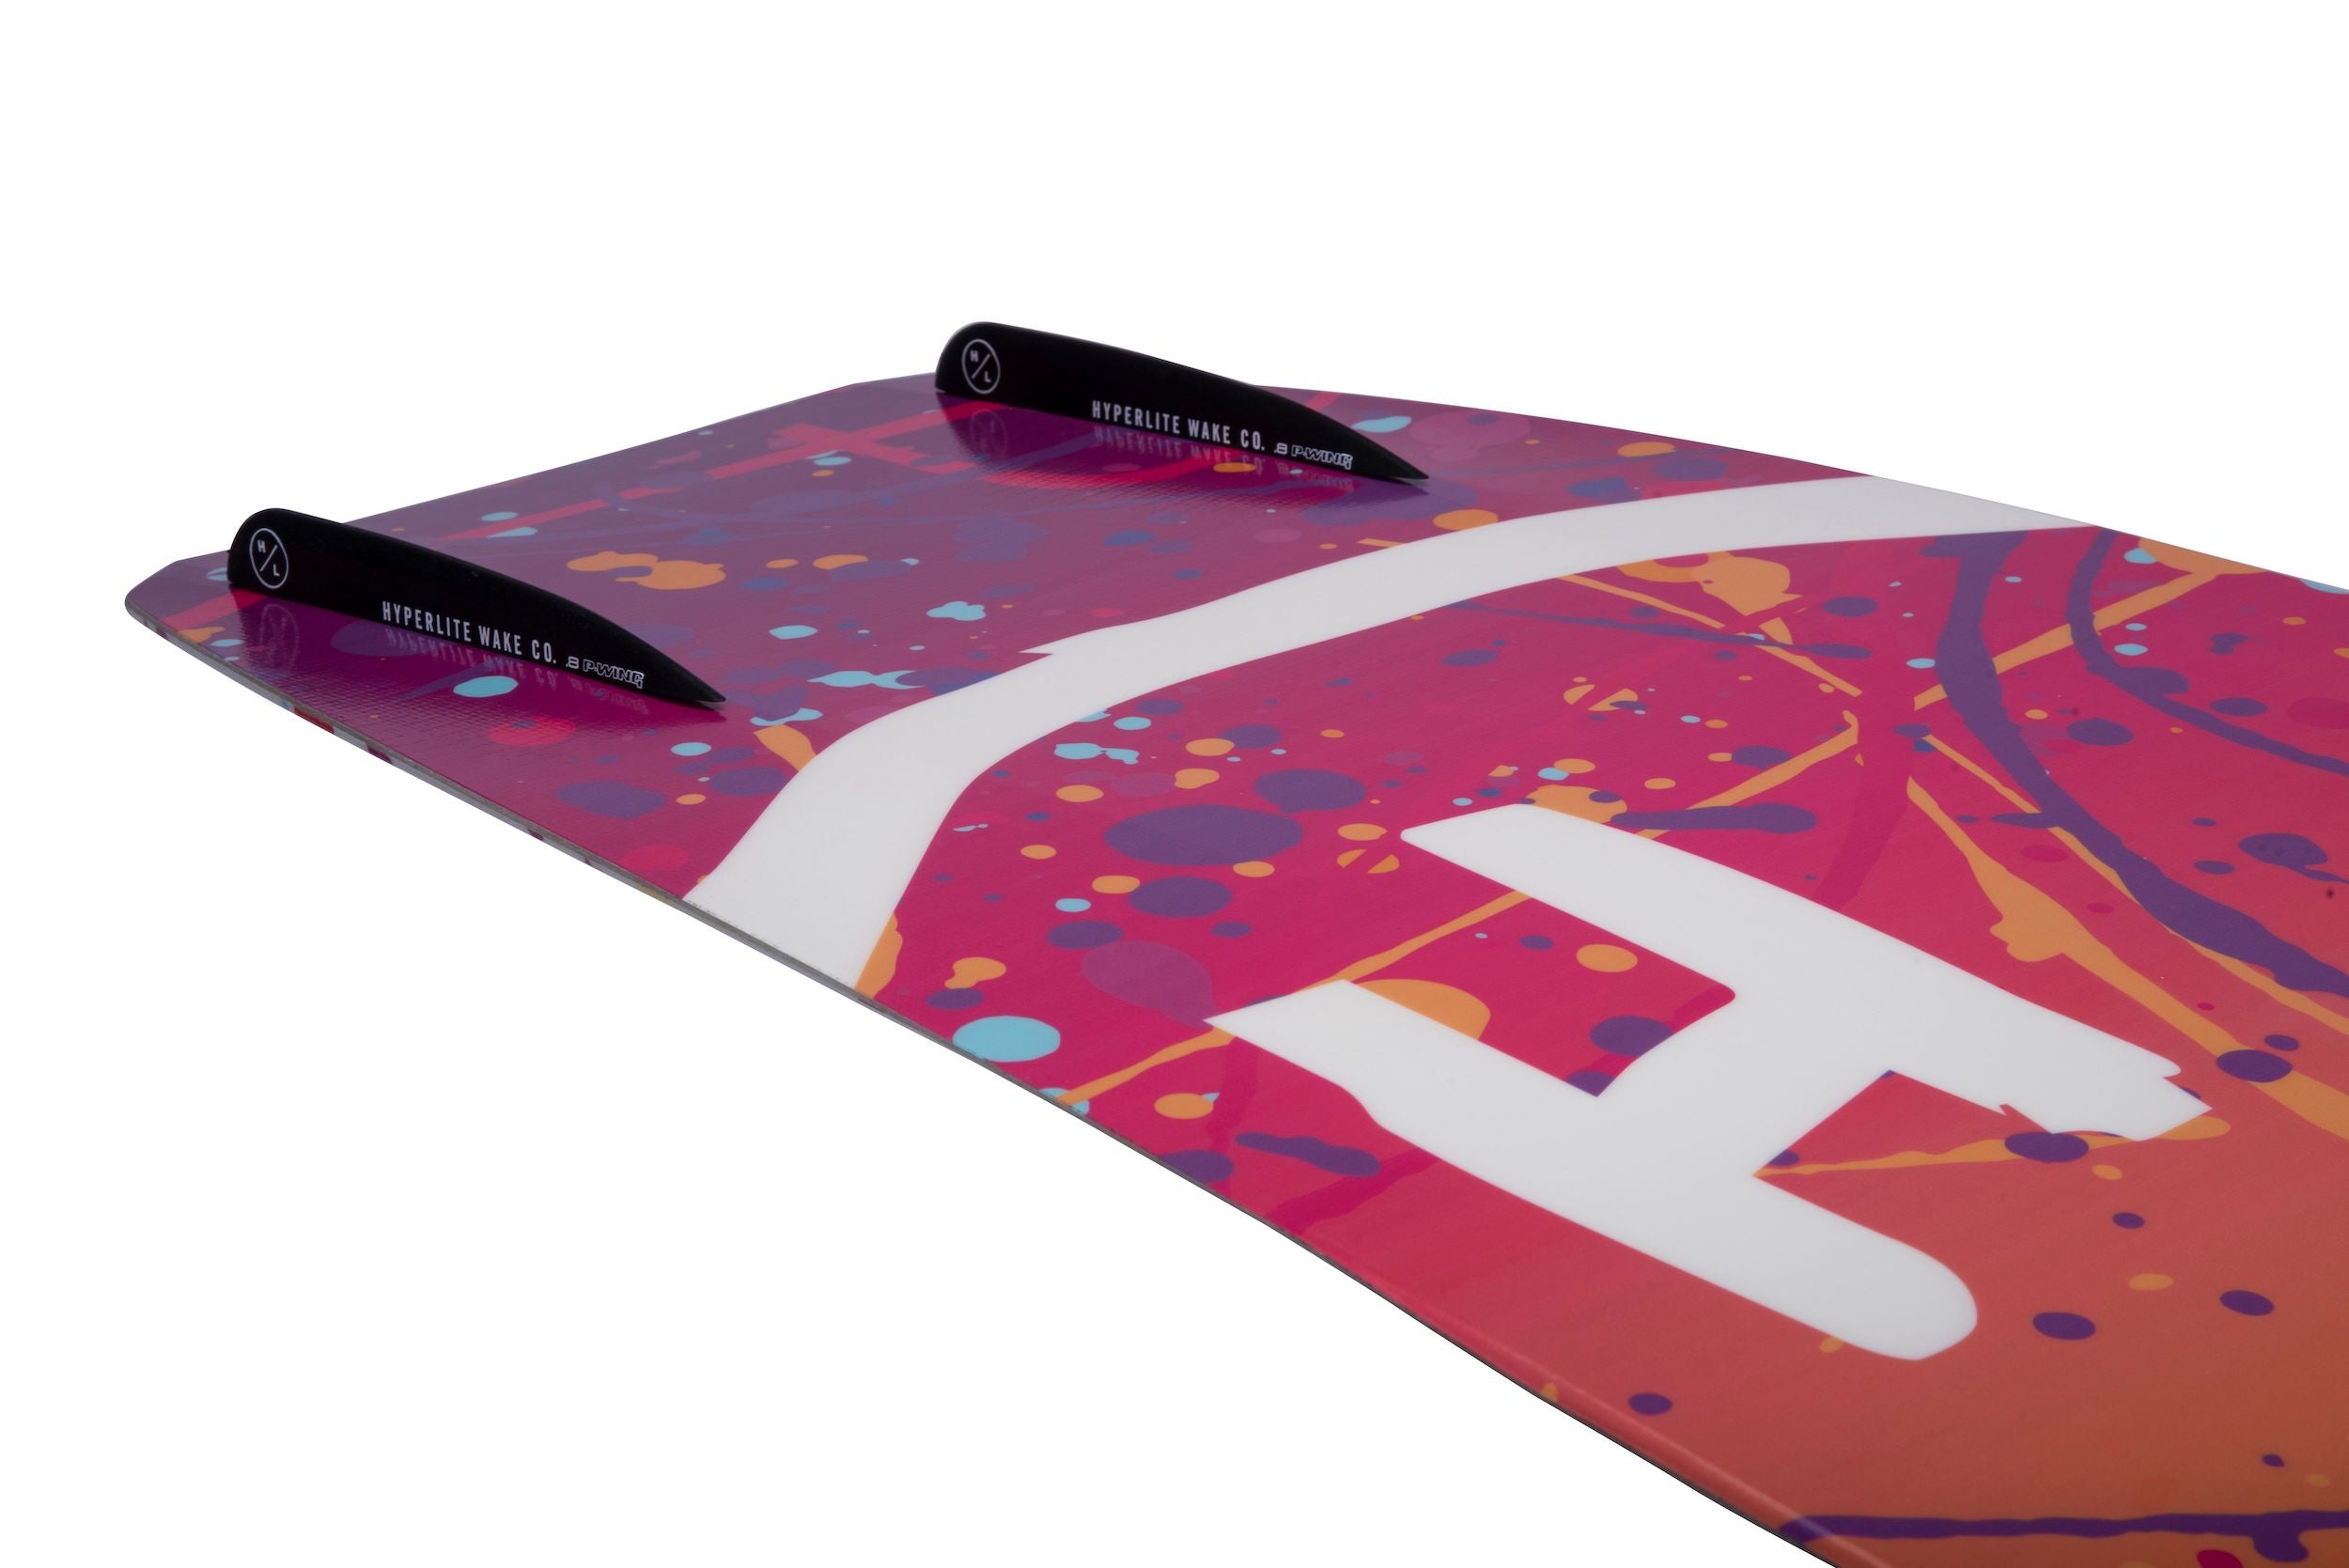 A Hyperlite 2024 Murray Girls Wakeboard with the word "h" on it, designed for Lil It Girls.